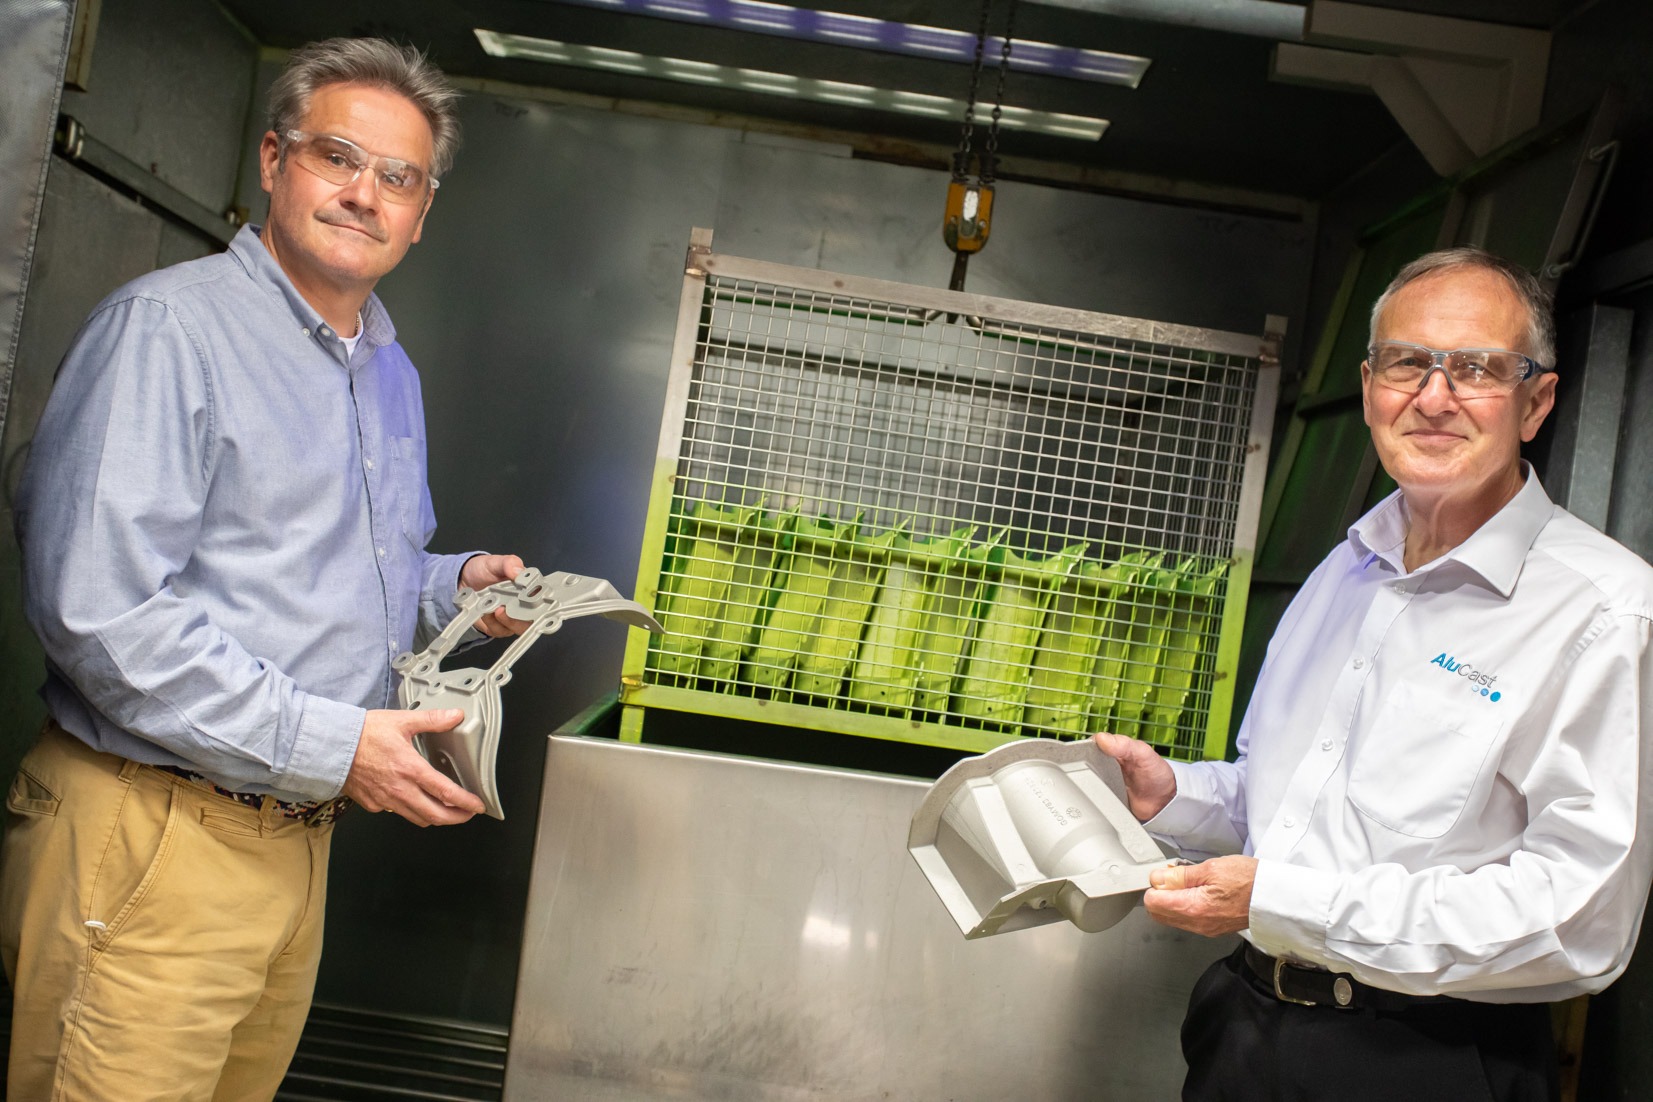 Alucast casts the dye with new £200,000 investment in testing capability Alucast